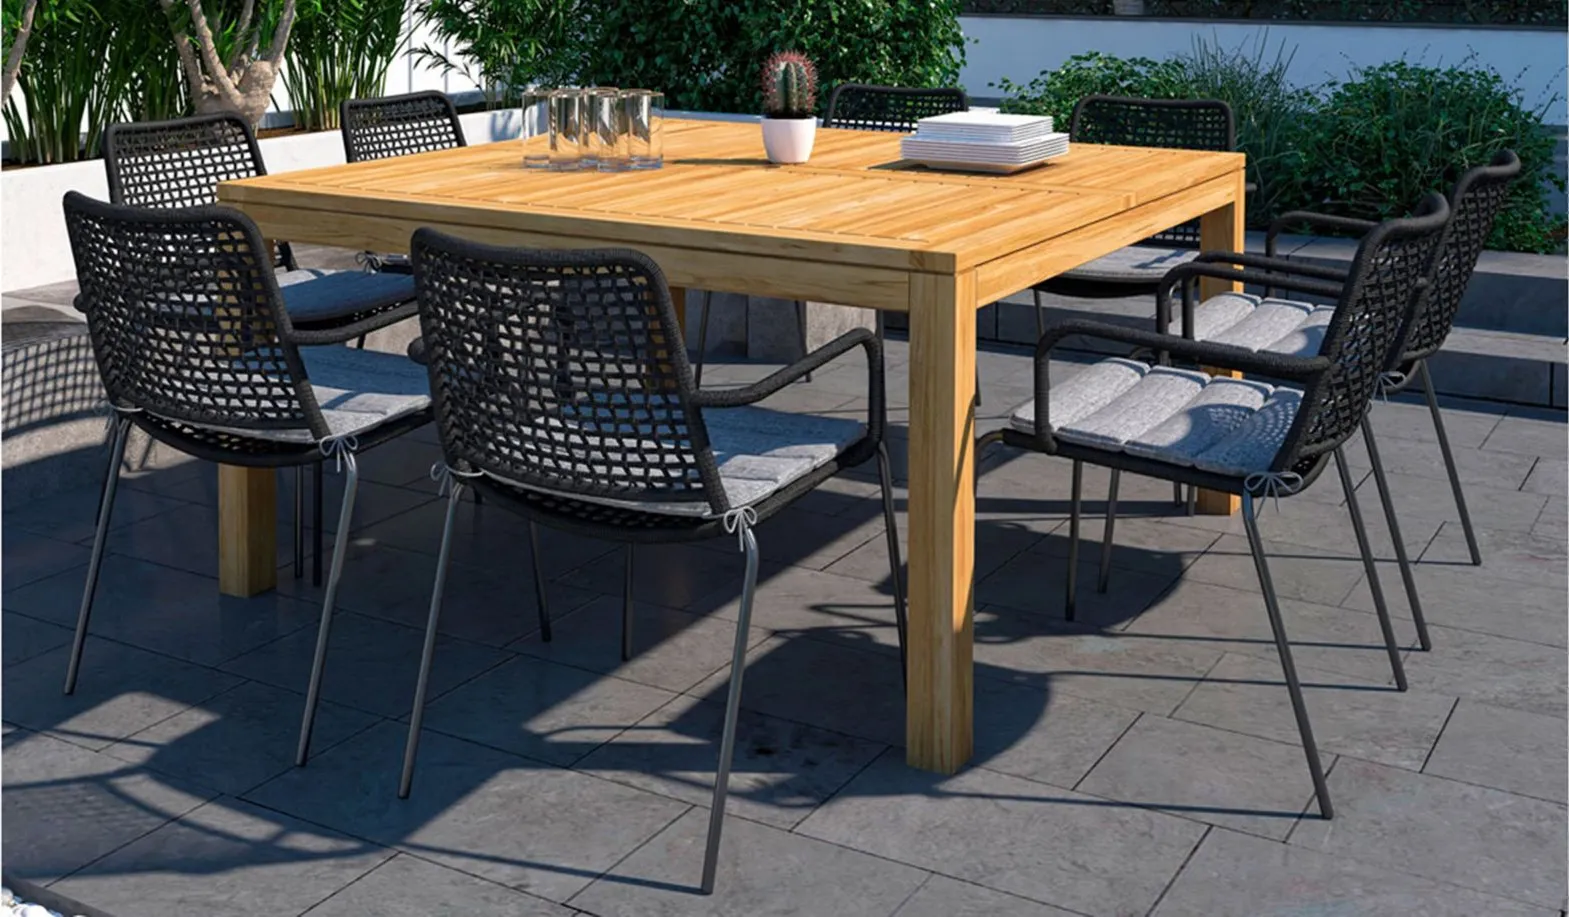 Amazonia Outdoor 9-pc. Square Patio Dining Table Set in Brown by International Home Miami